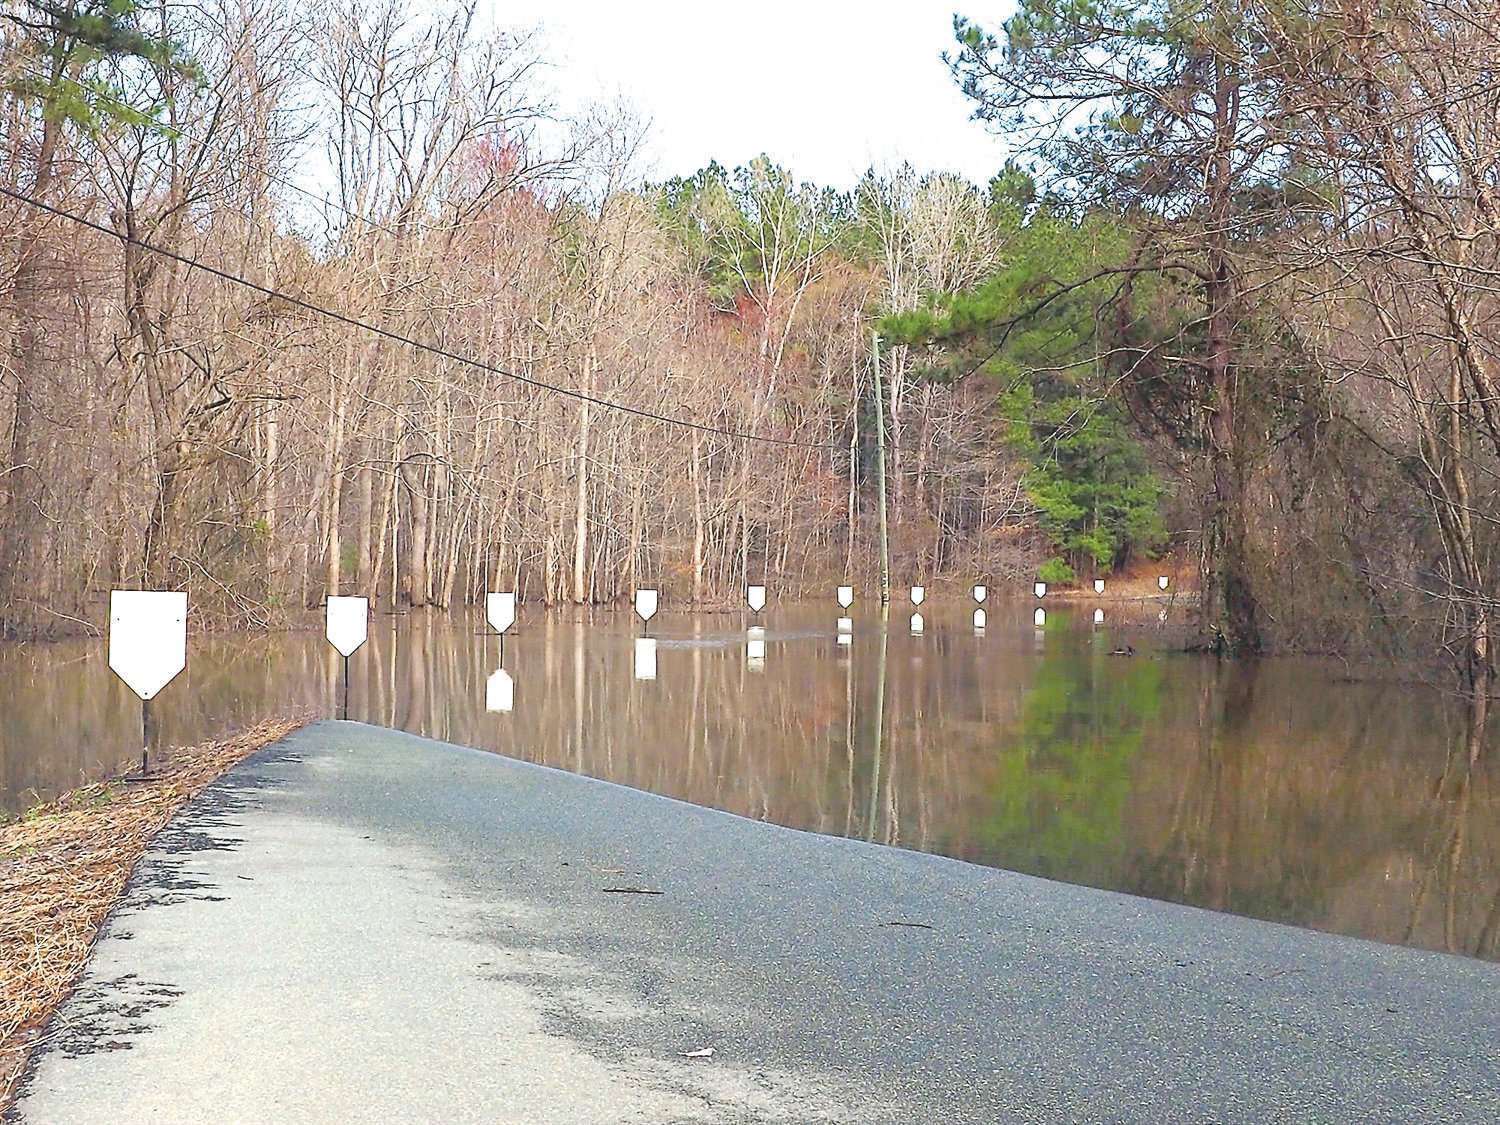 Residents of Jeremiah Drive were flooded by water from Jordan Lake for more than 70 days after two N.C. hurricanes in September 2019.